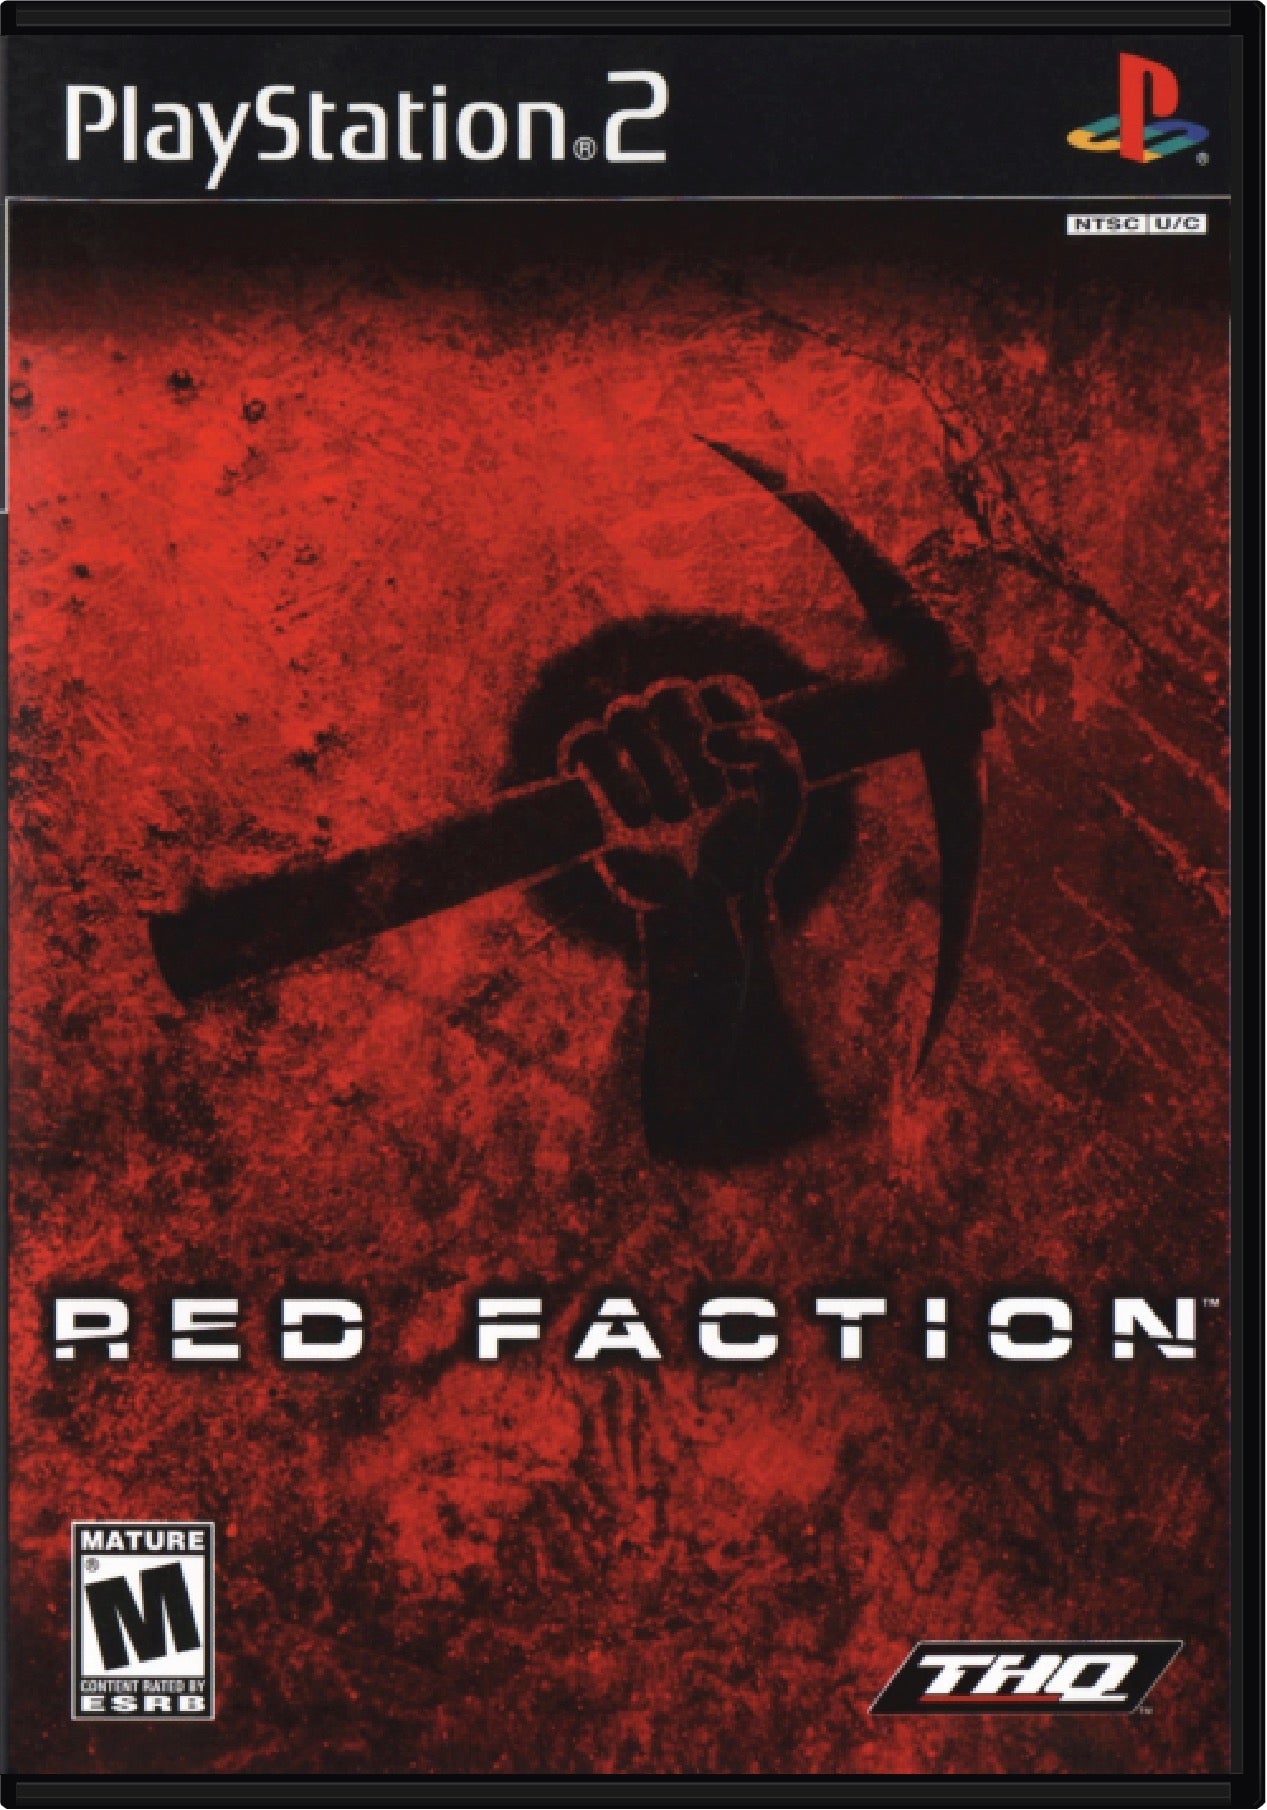 Red Faction Cover Art and Product Photo